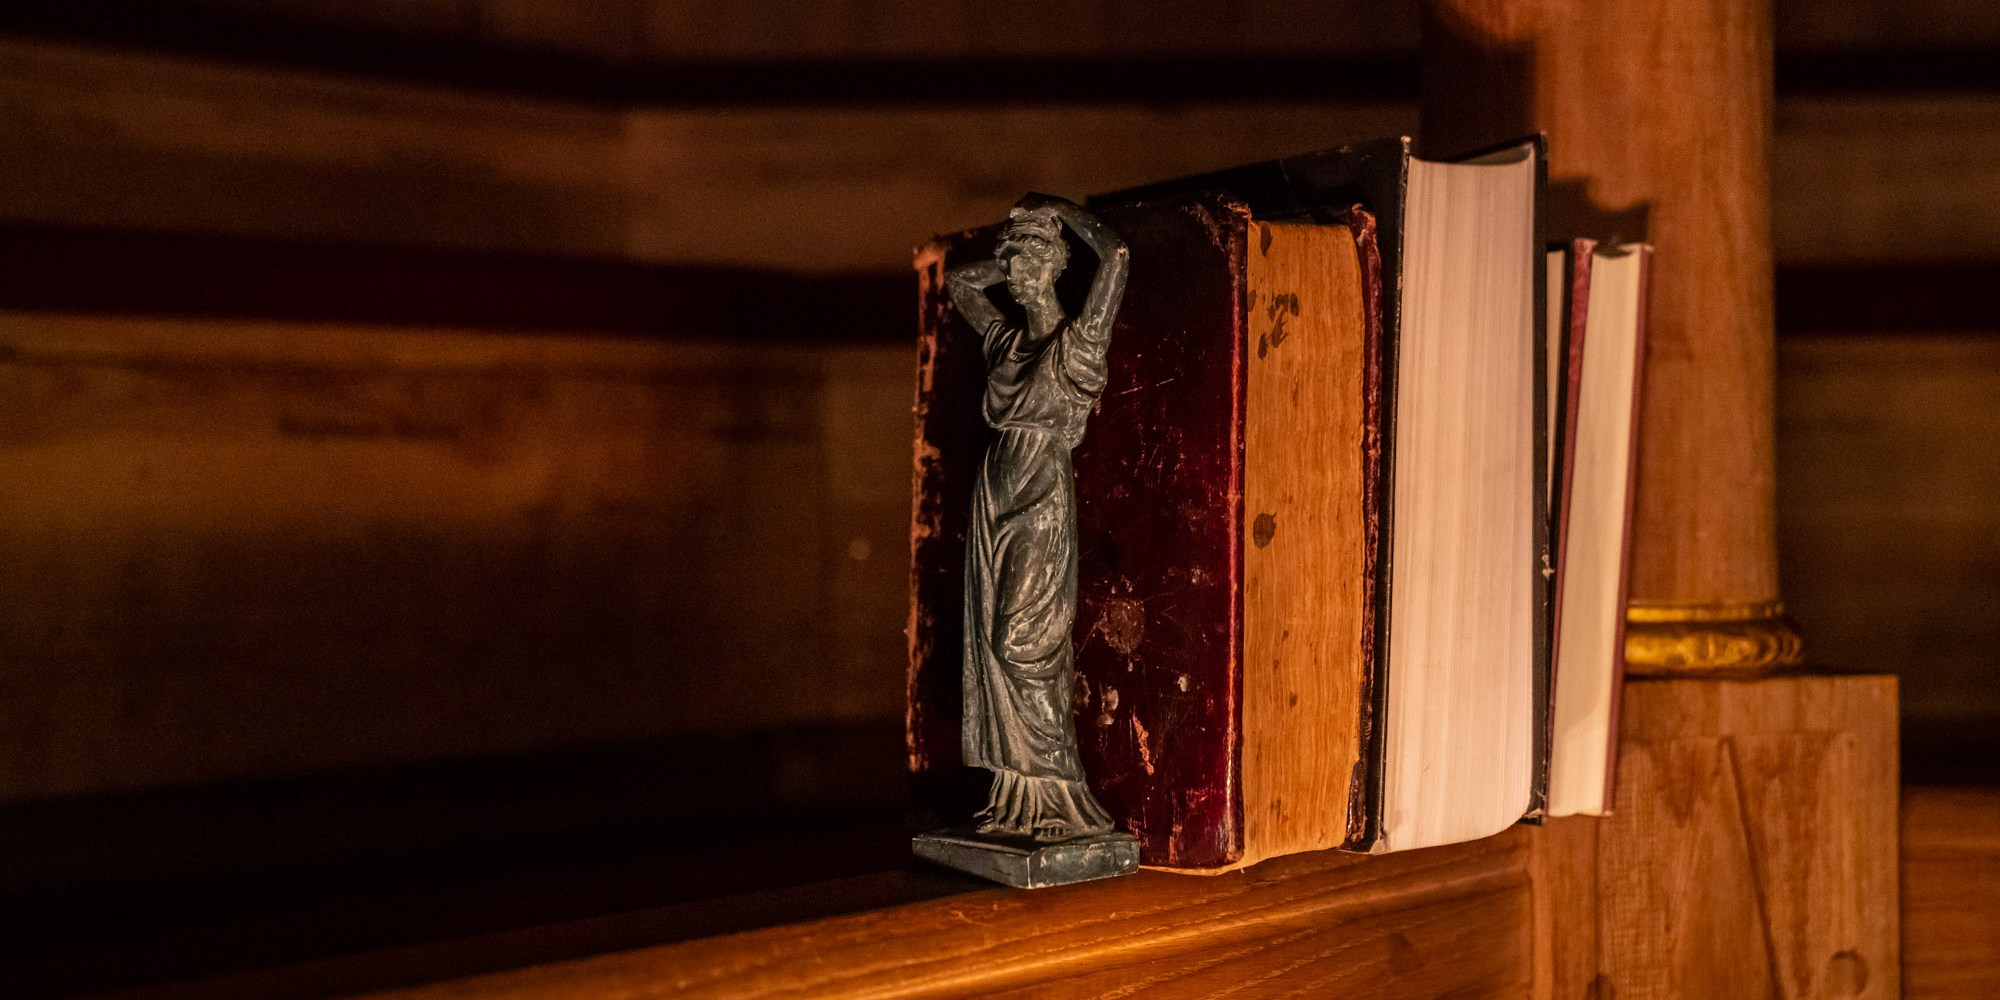 A row of books sits on the wooden gallery of the Sam Wanamaker Playhouse, cast in candlelight and shadows.